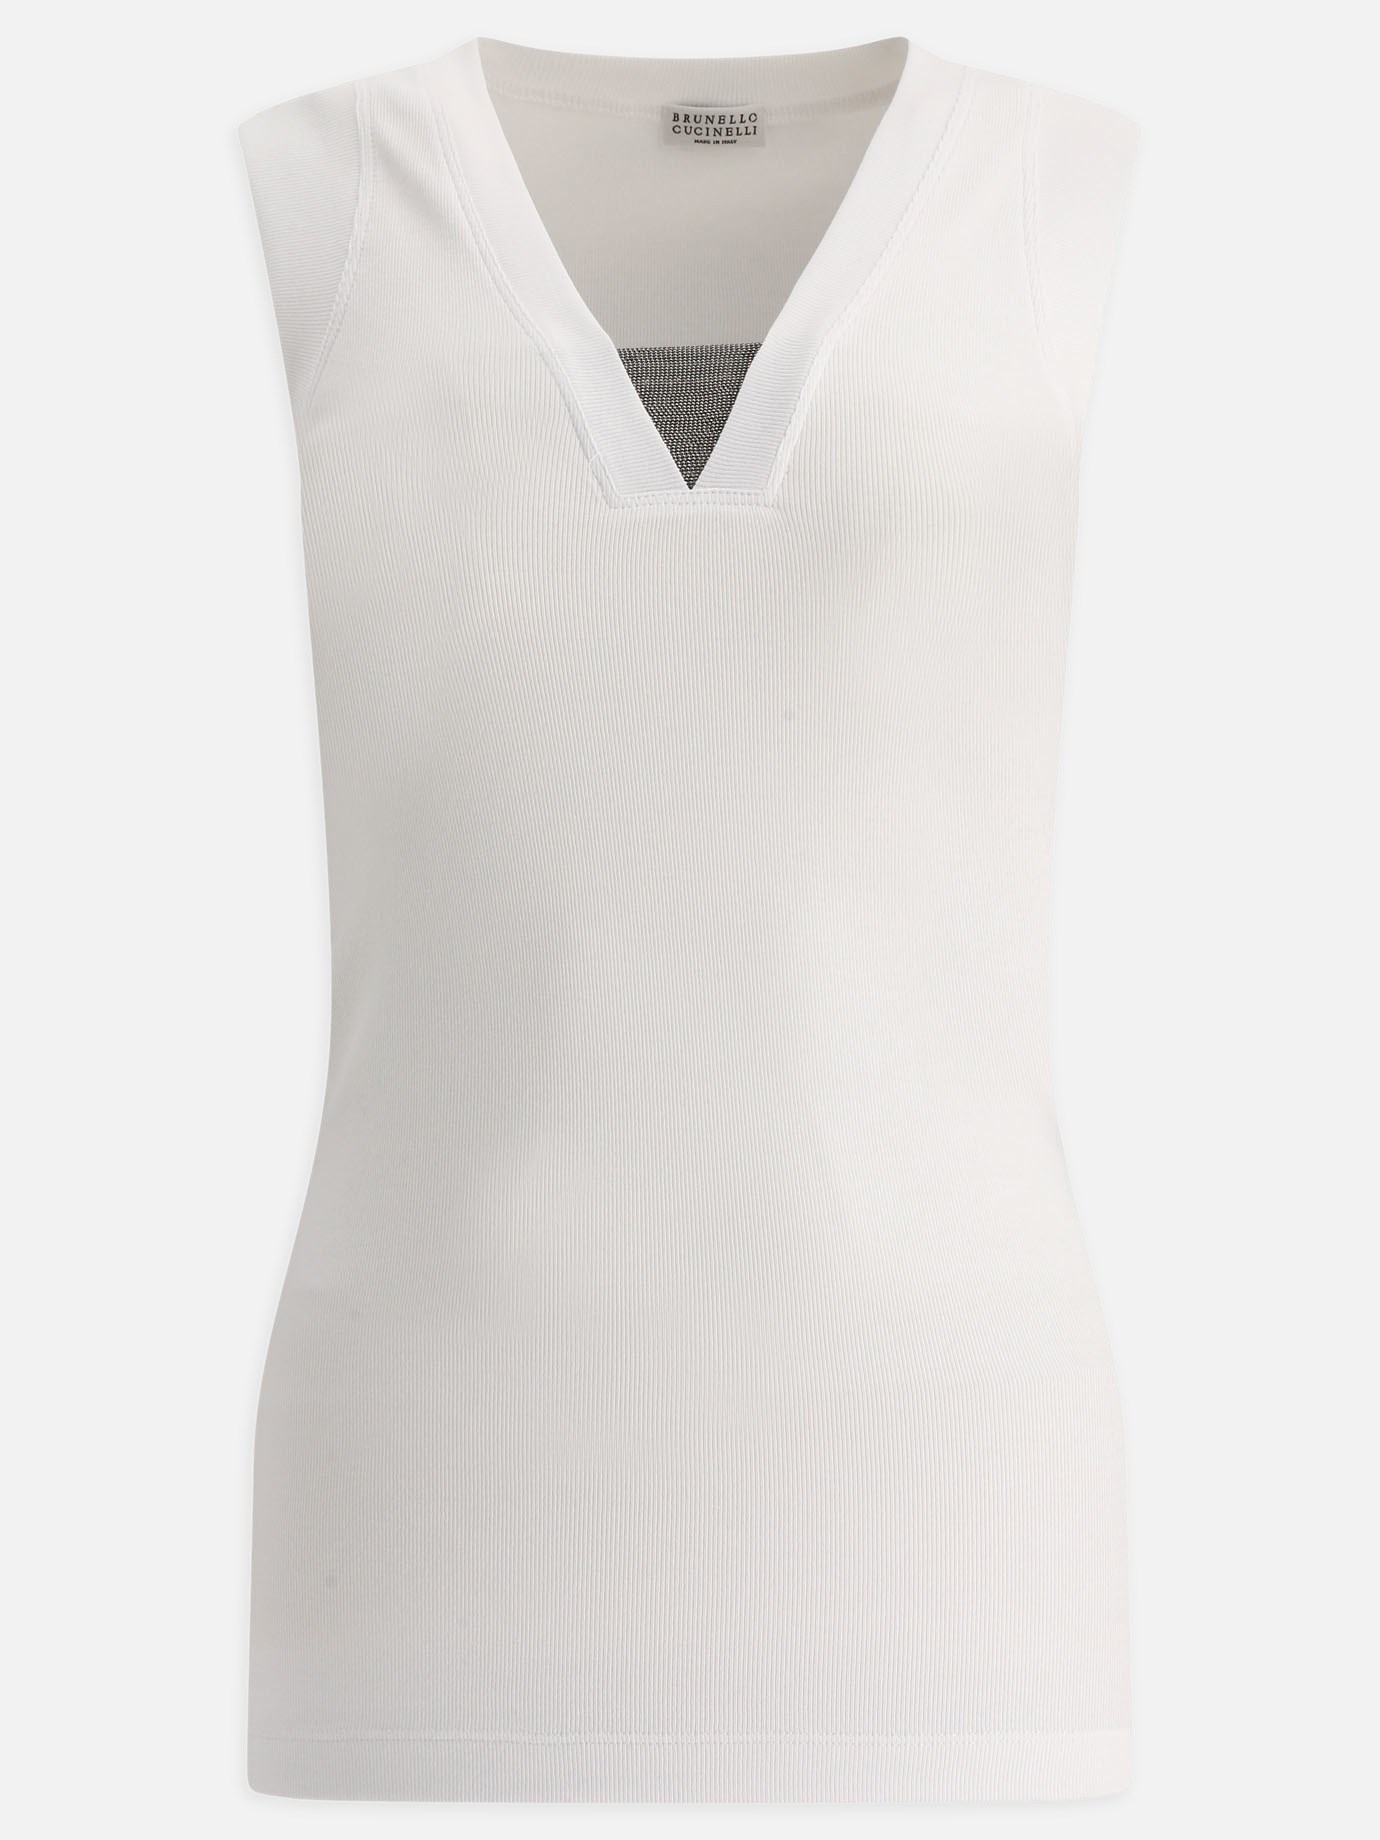 Ribbed tank top with rhinestones by Brunello Cucinelli